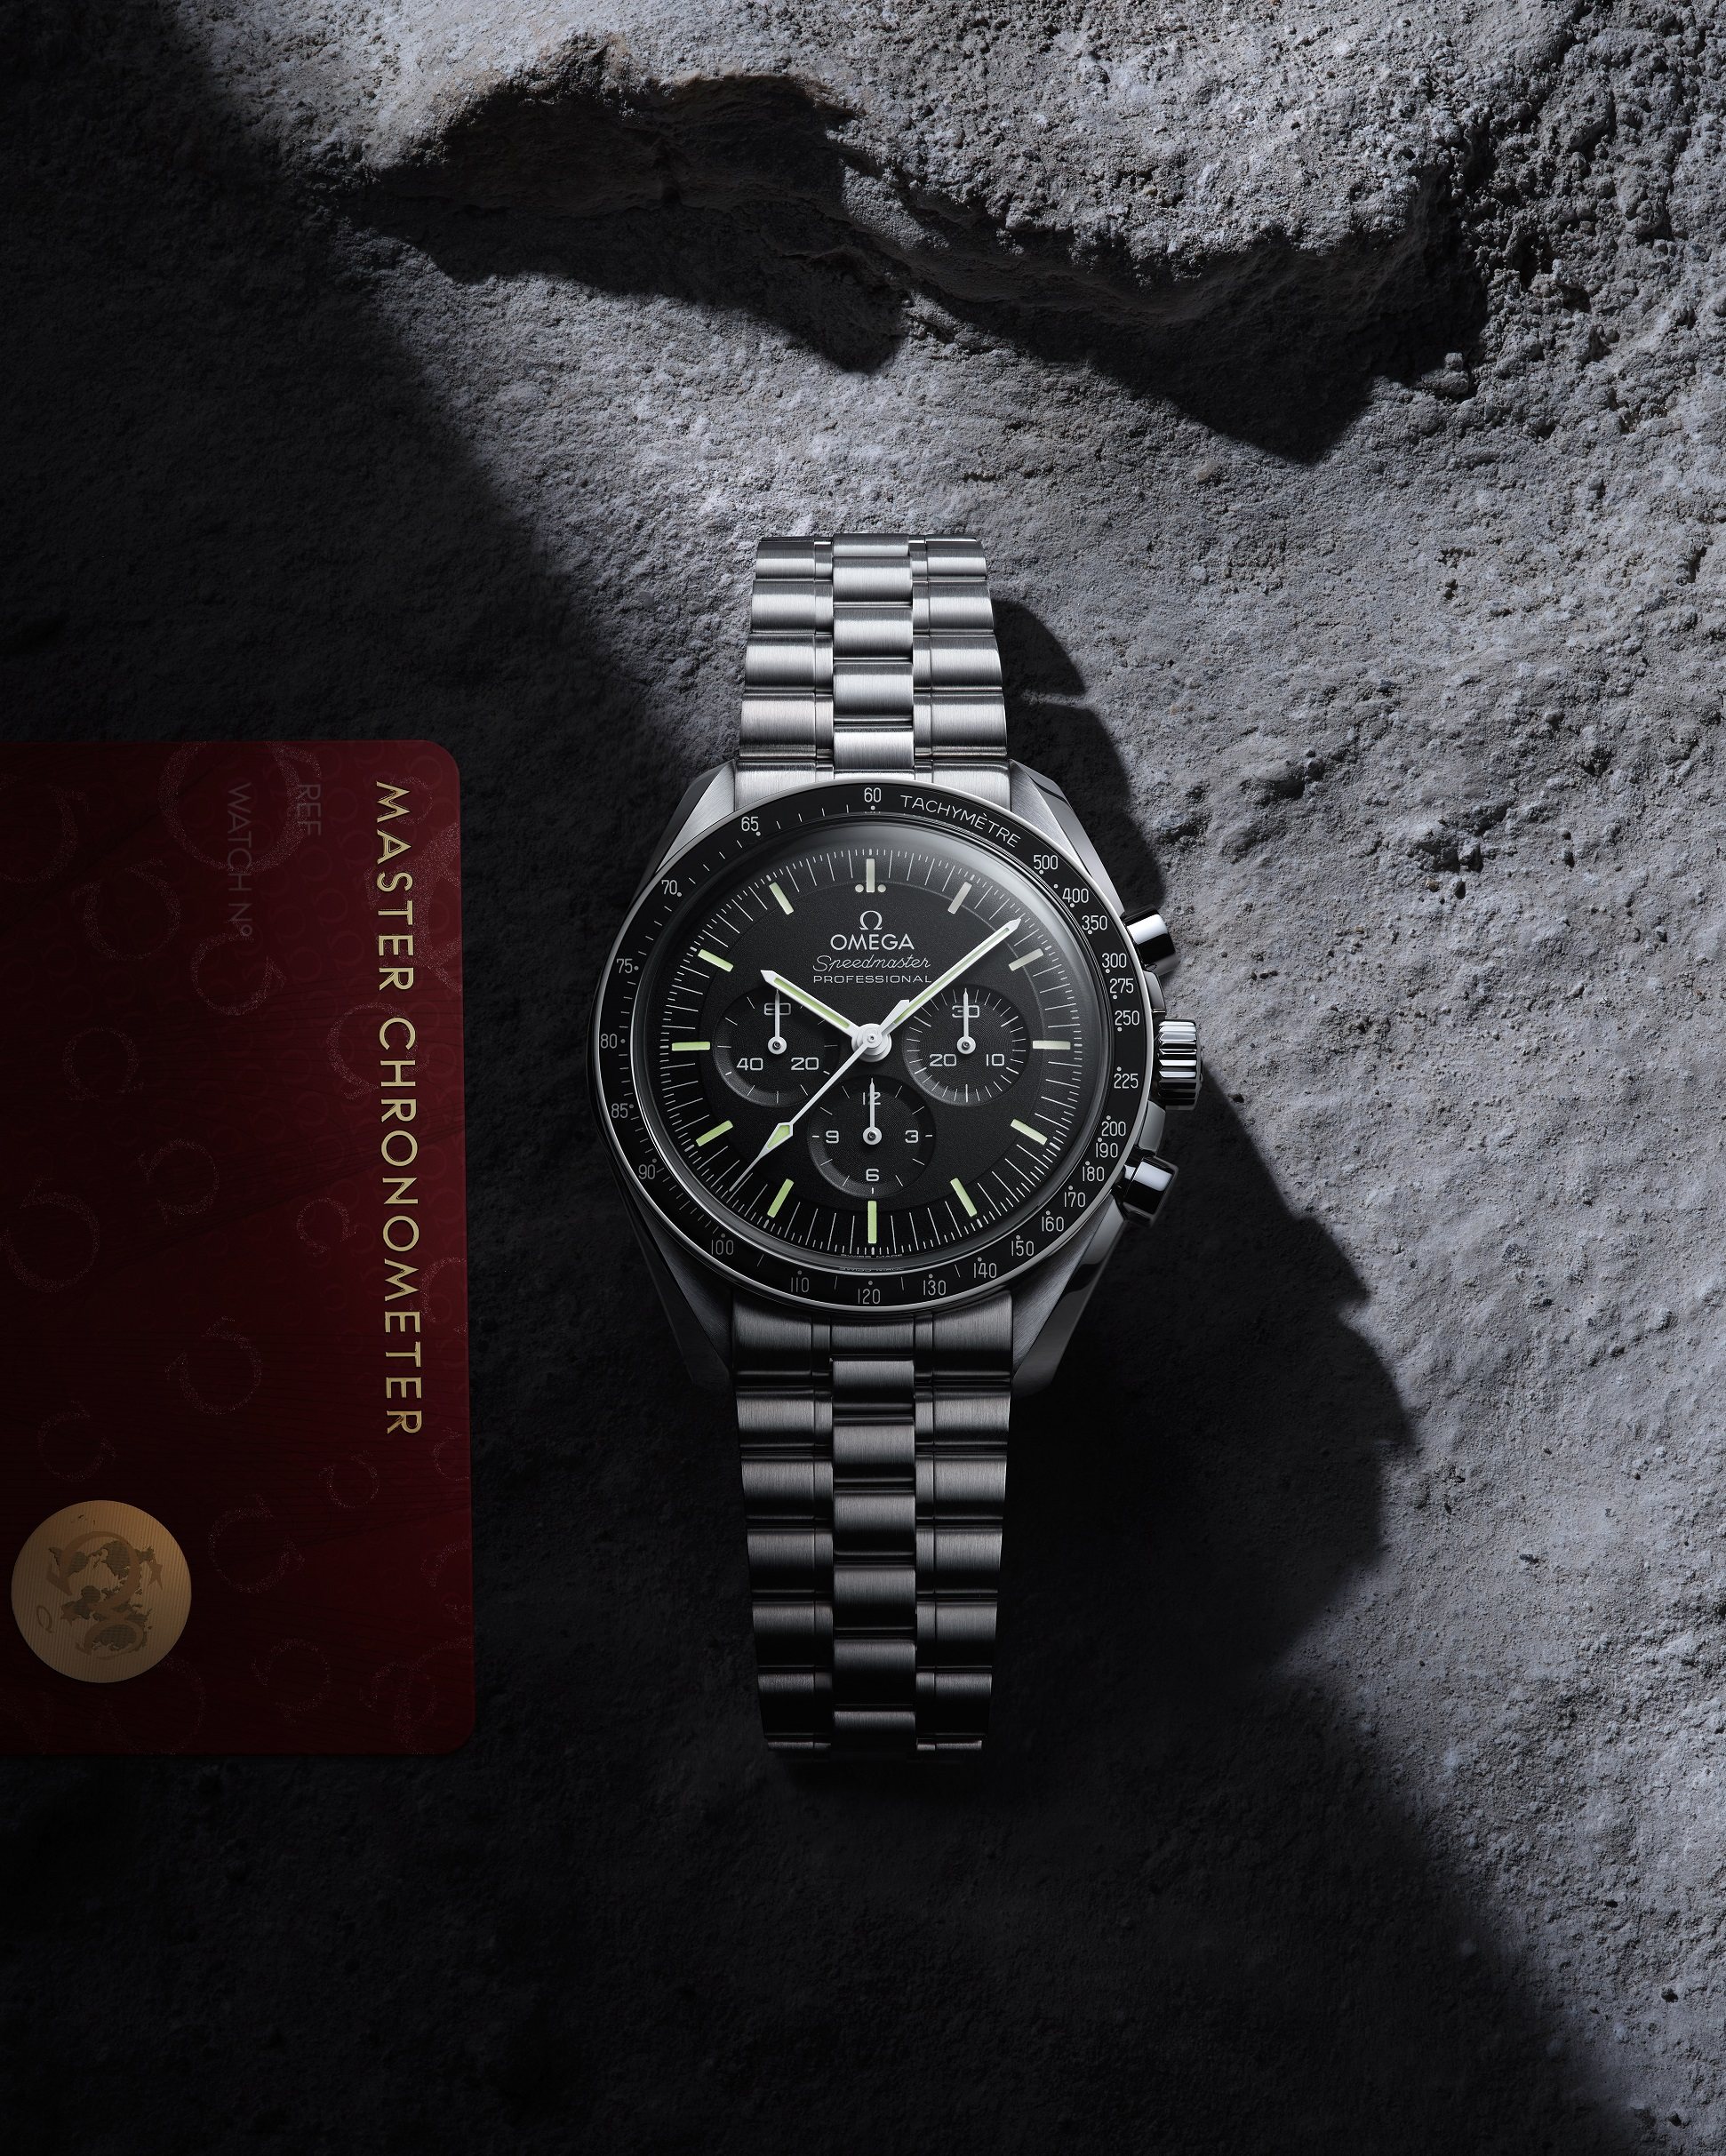 Omega’s Speedmaster Moonwatch has had a significant update for 2021, including the introduction of a powerful Master Chronometer certified anti-magnetic movement. Photo: Omega

